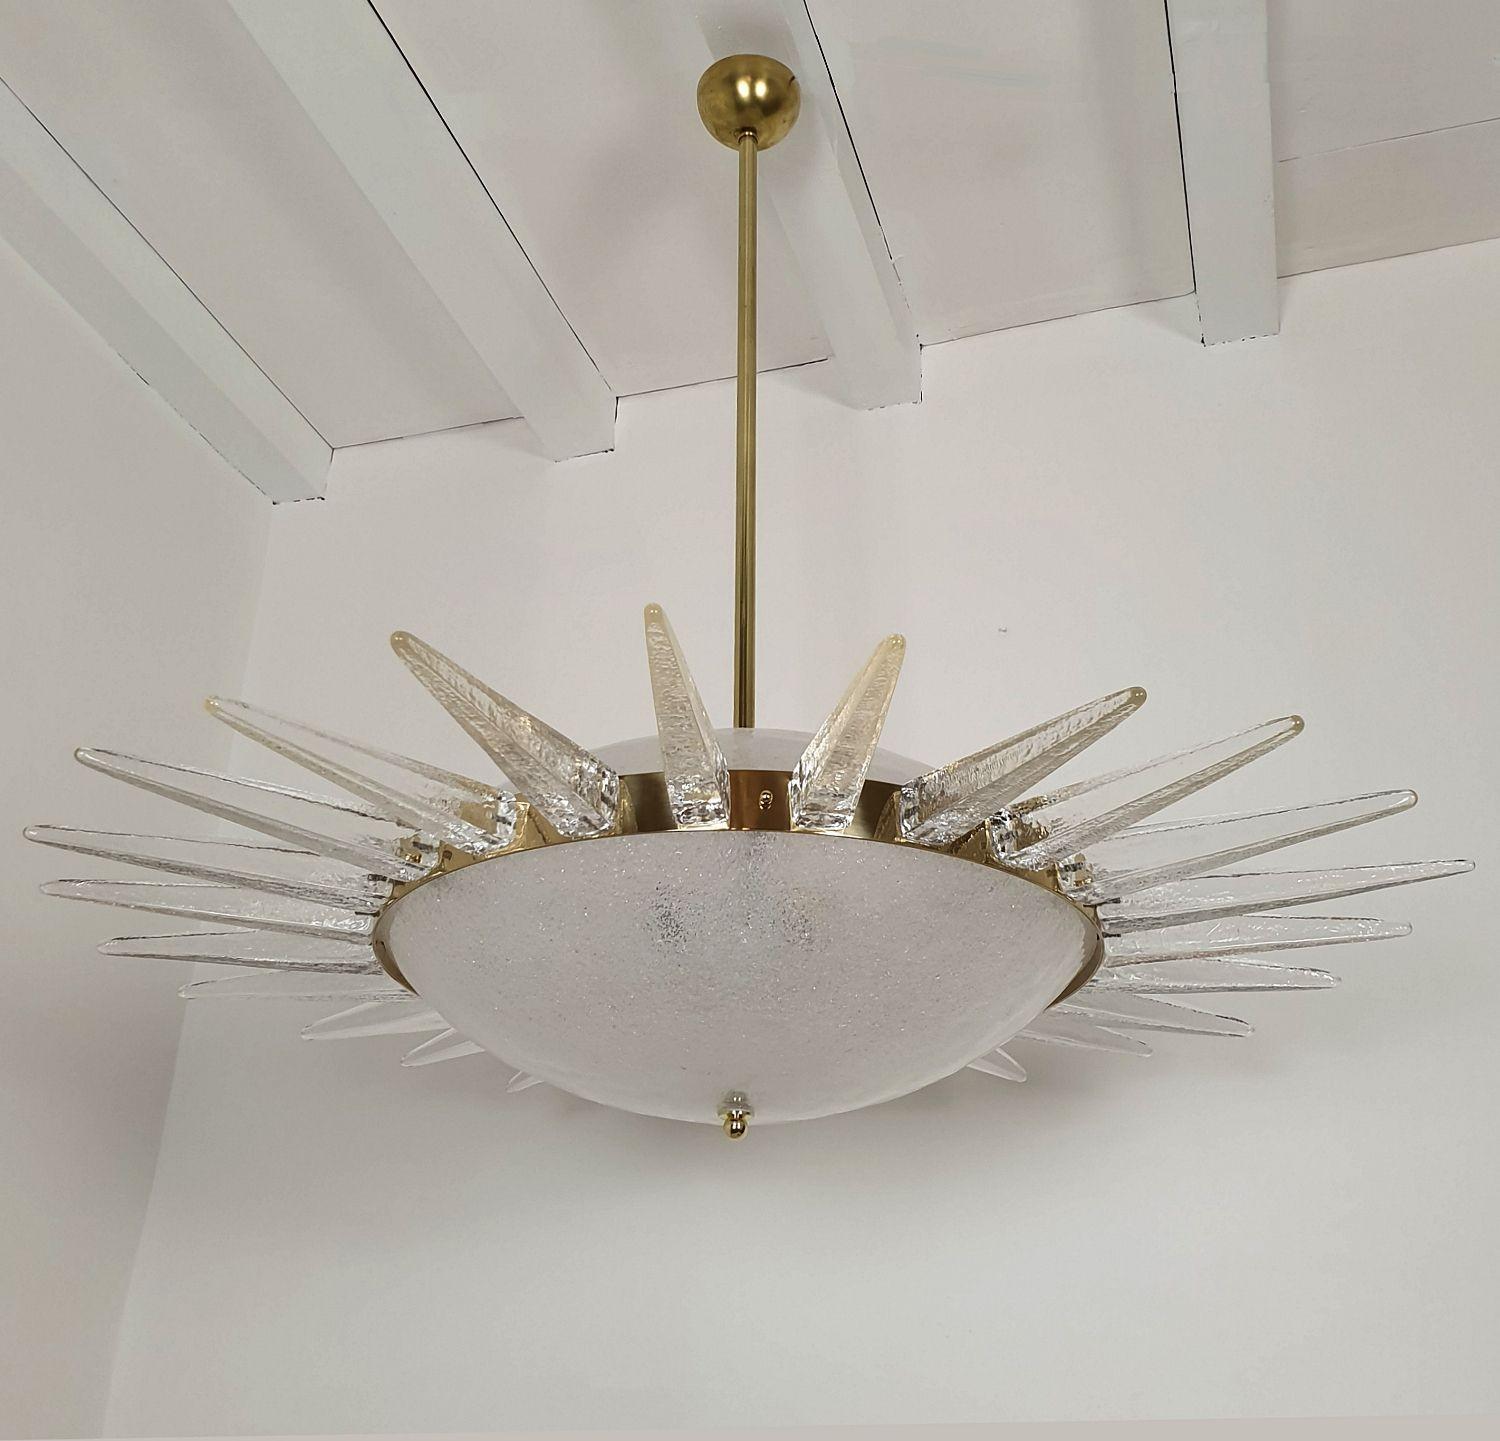 Mid Century Modern large Murano glass chandelier, attributed to Seguso, Italy 1970.
The chandelier is made of clear Murano glass: top and bottom central glasses are textured and translucent.
And it's surrounded with a Murano 